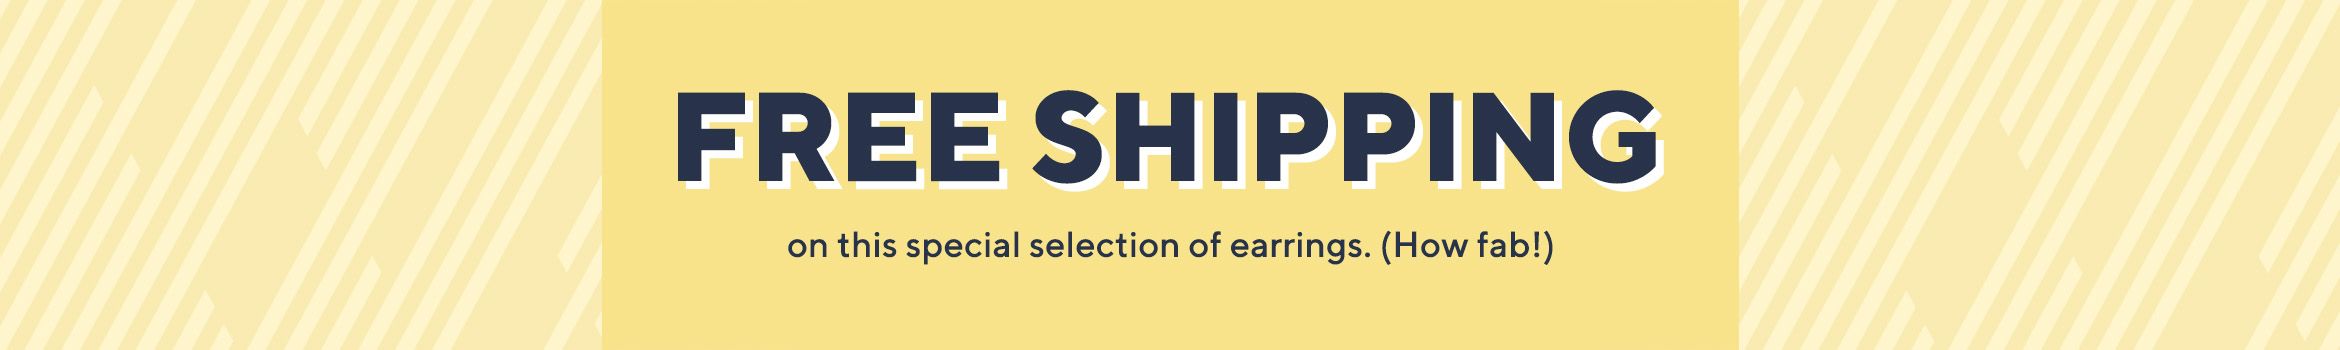 Free Shipping on this special selection of earrings. (How fab!)